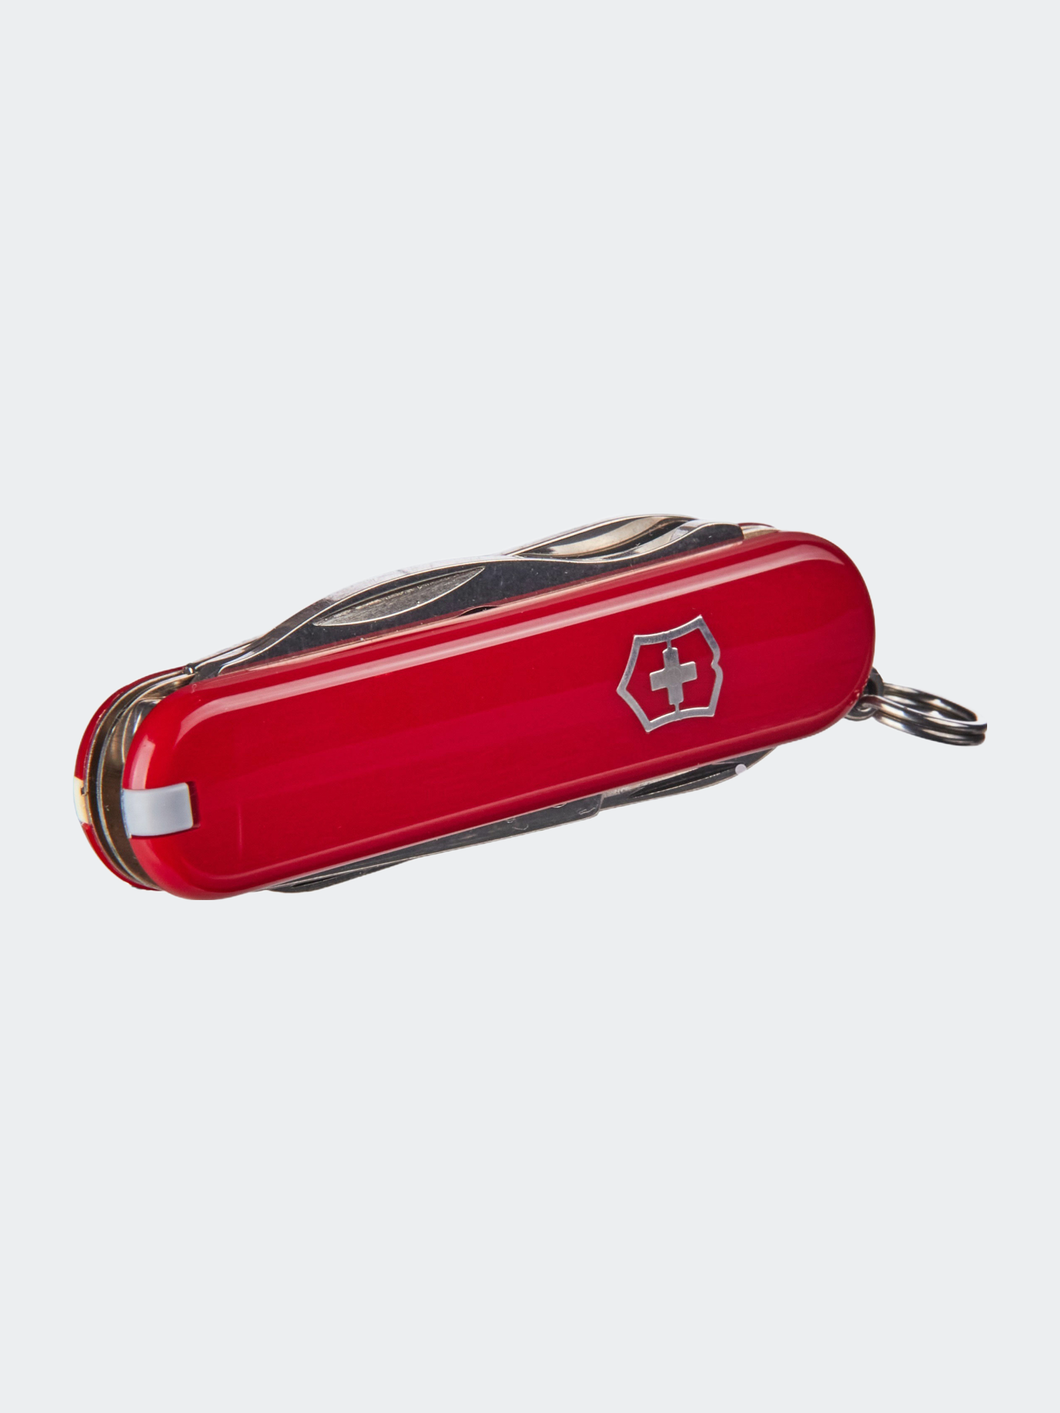 Rambler 10 Function Stainless Steel Swiss Army Knife